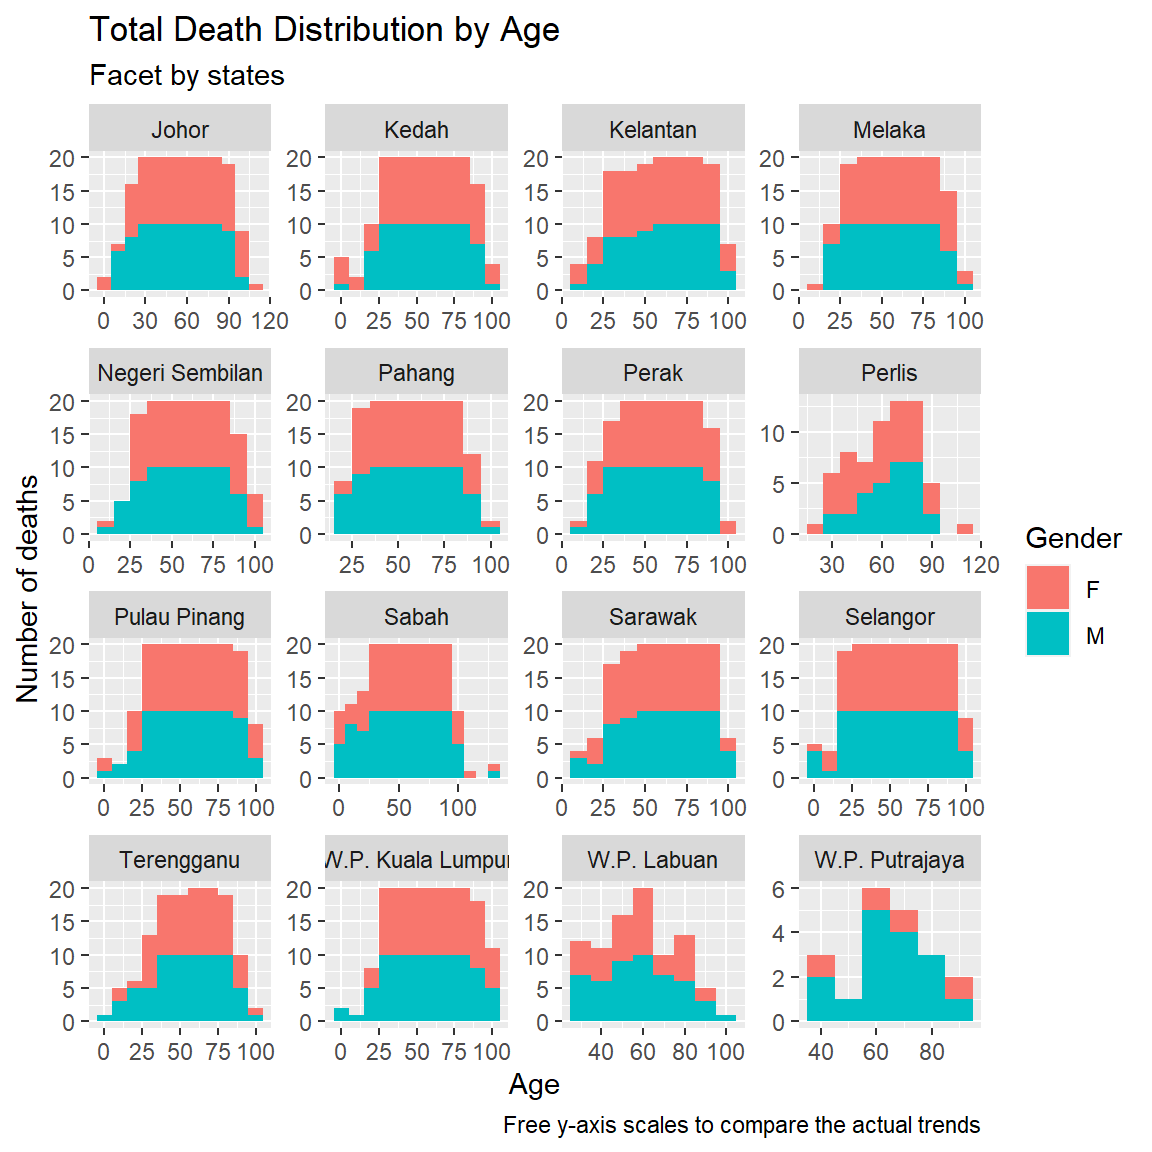 Deaths by age and gender faceted by state and free scale